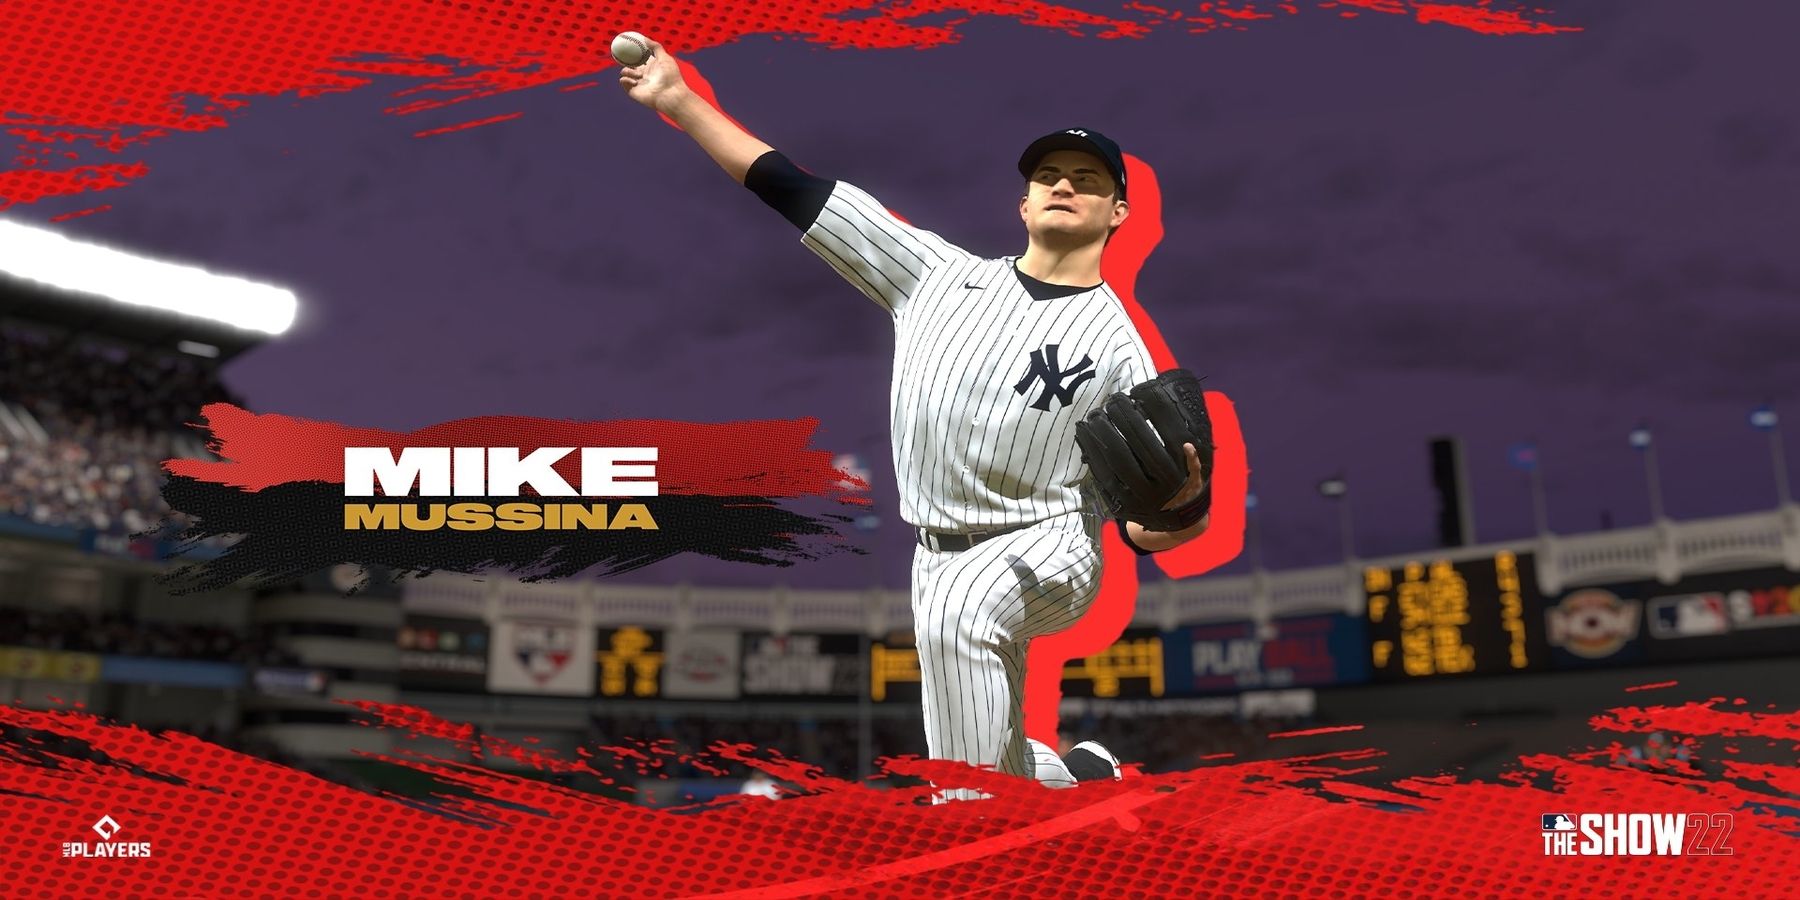 MLB The Show (@mlbtheshow) • Instagram photos and videos